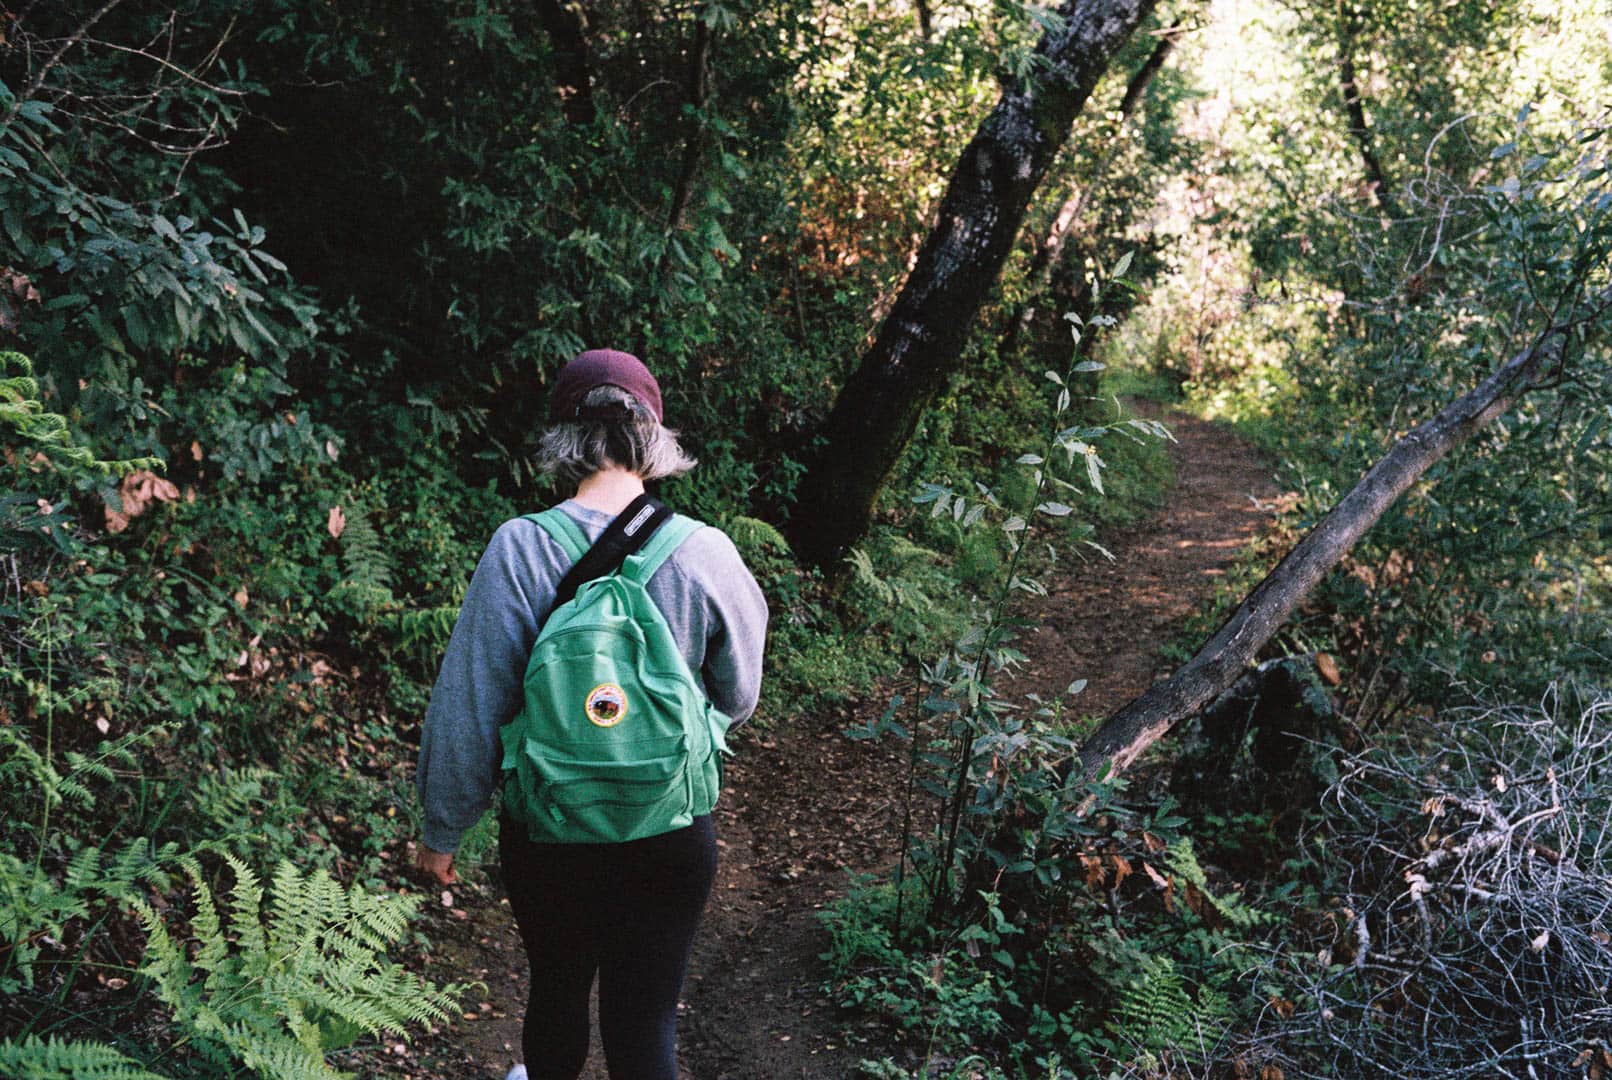 A woman wearing a green backpack on a hiking trail